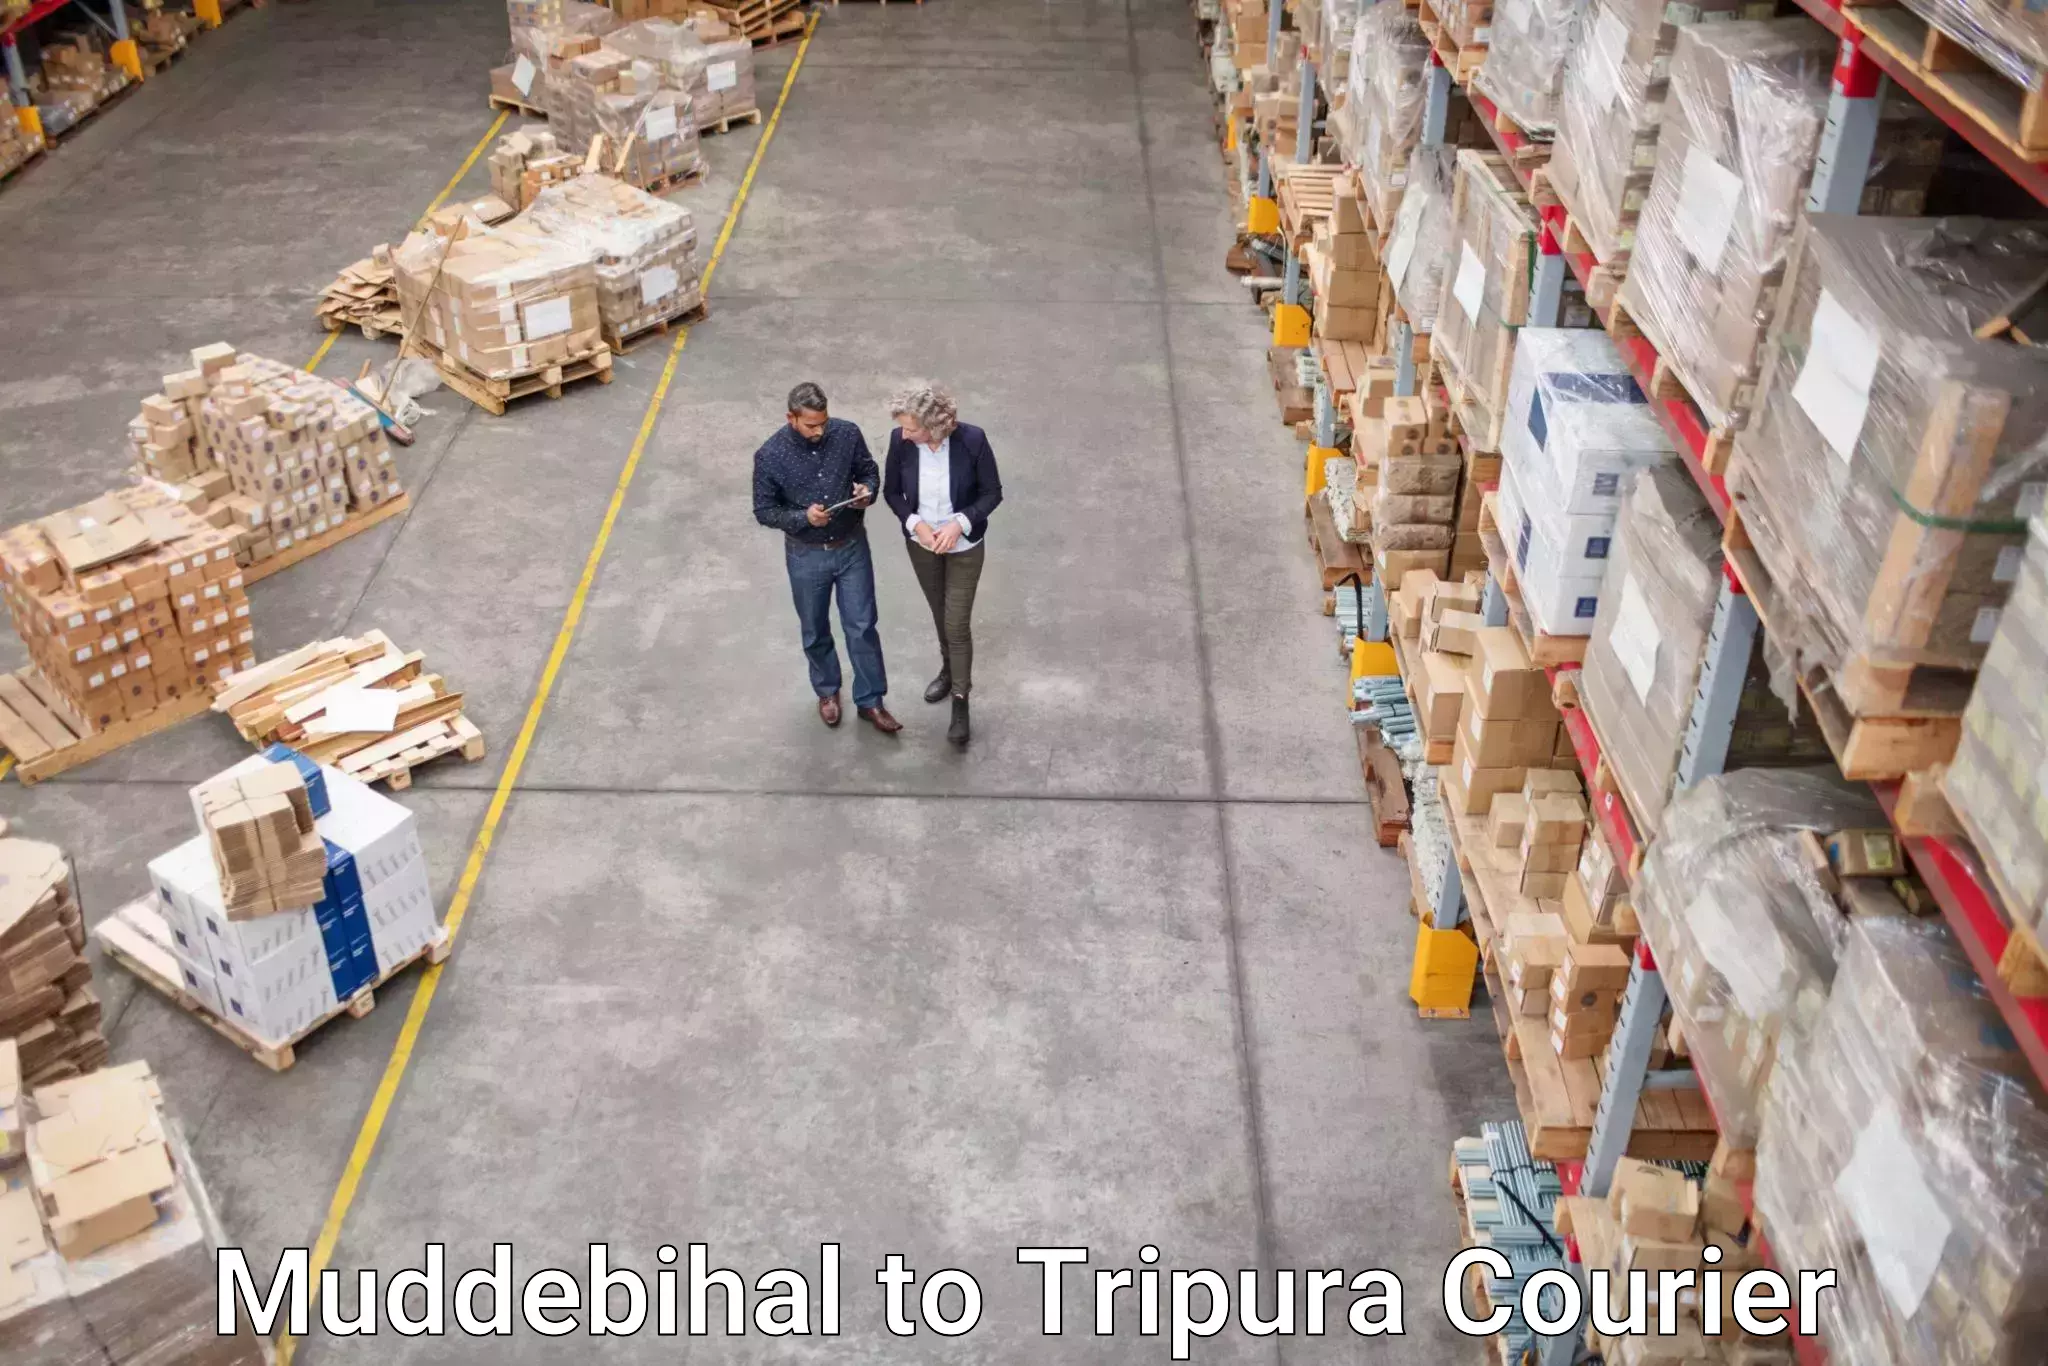 Reliable delivery network Muddebihal to Udaipur Tripura